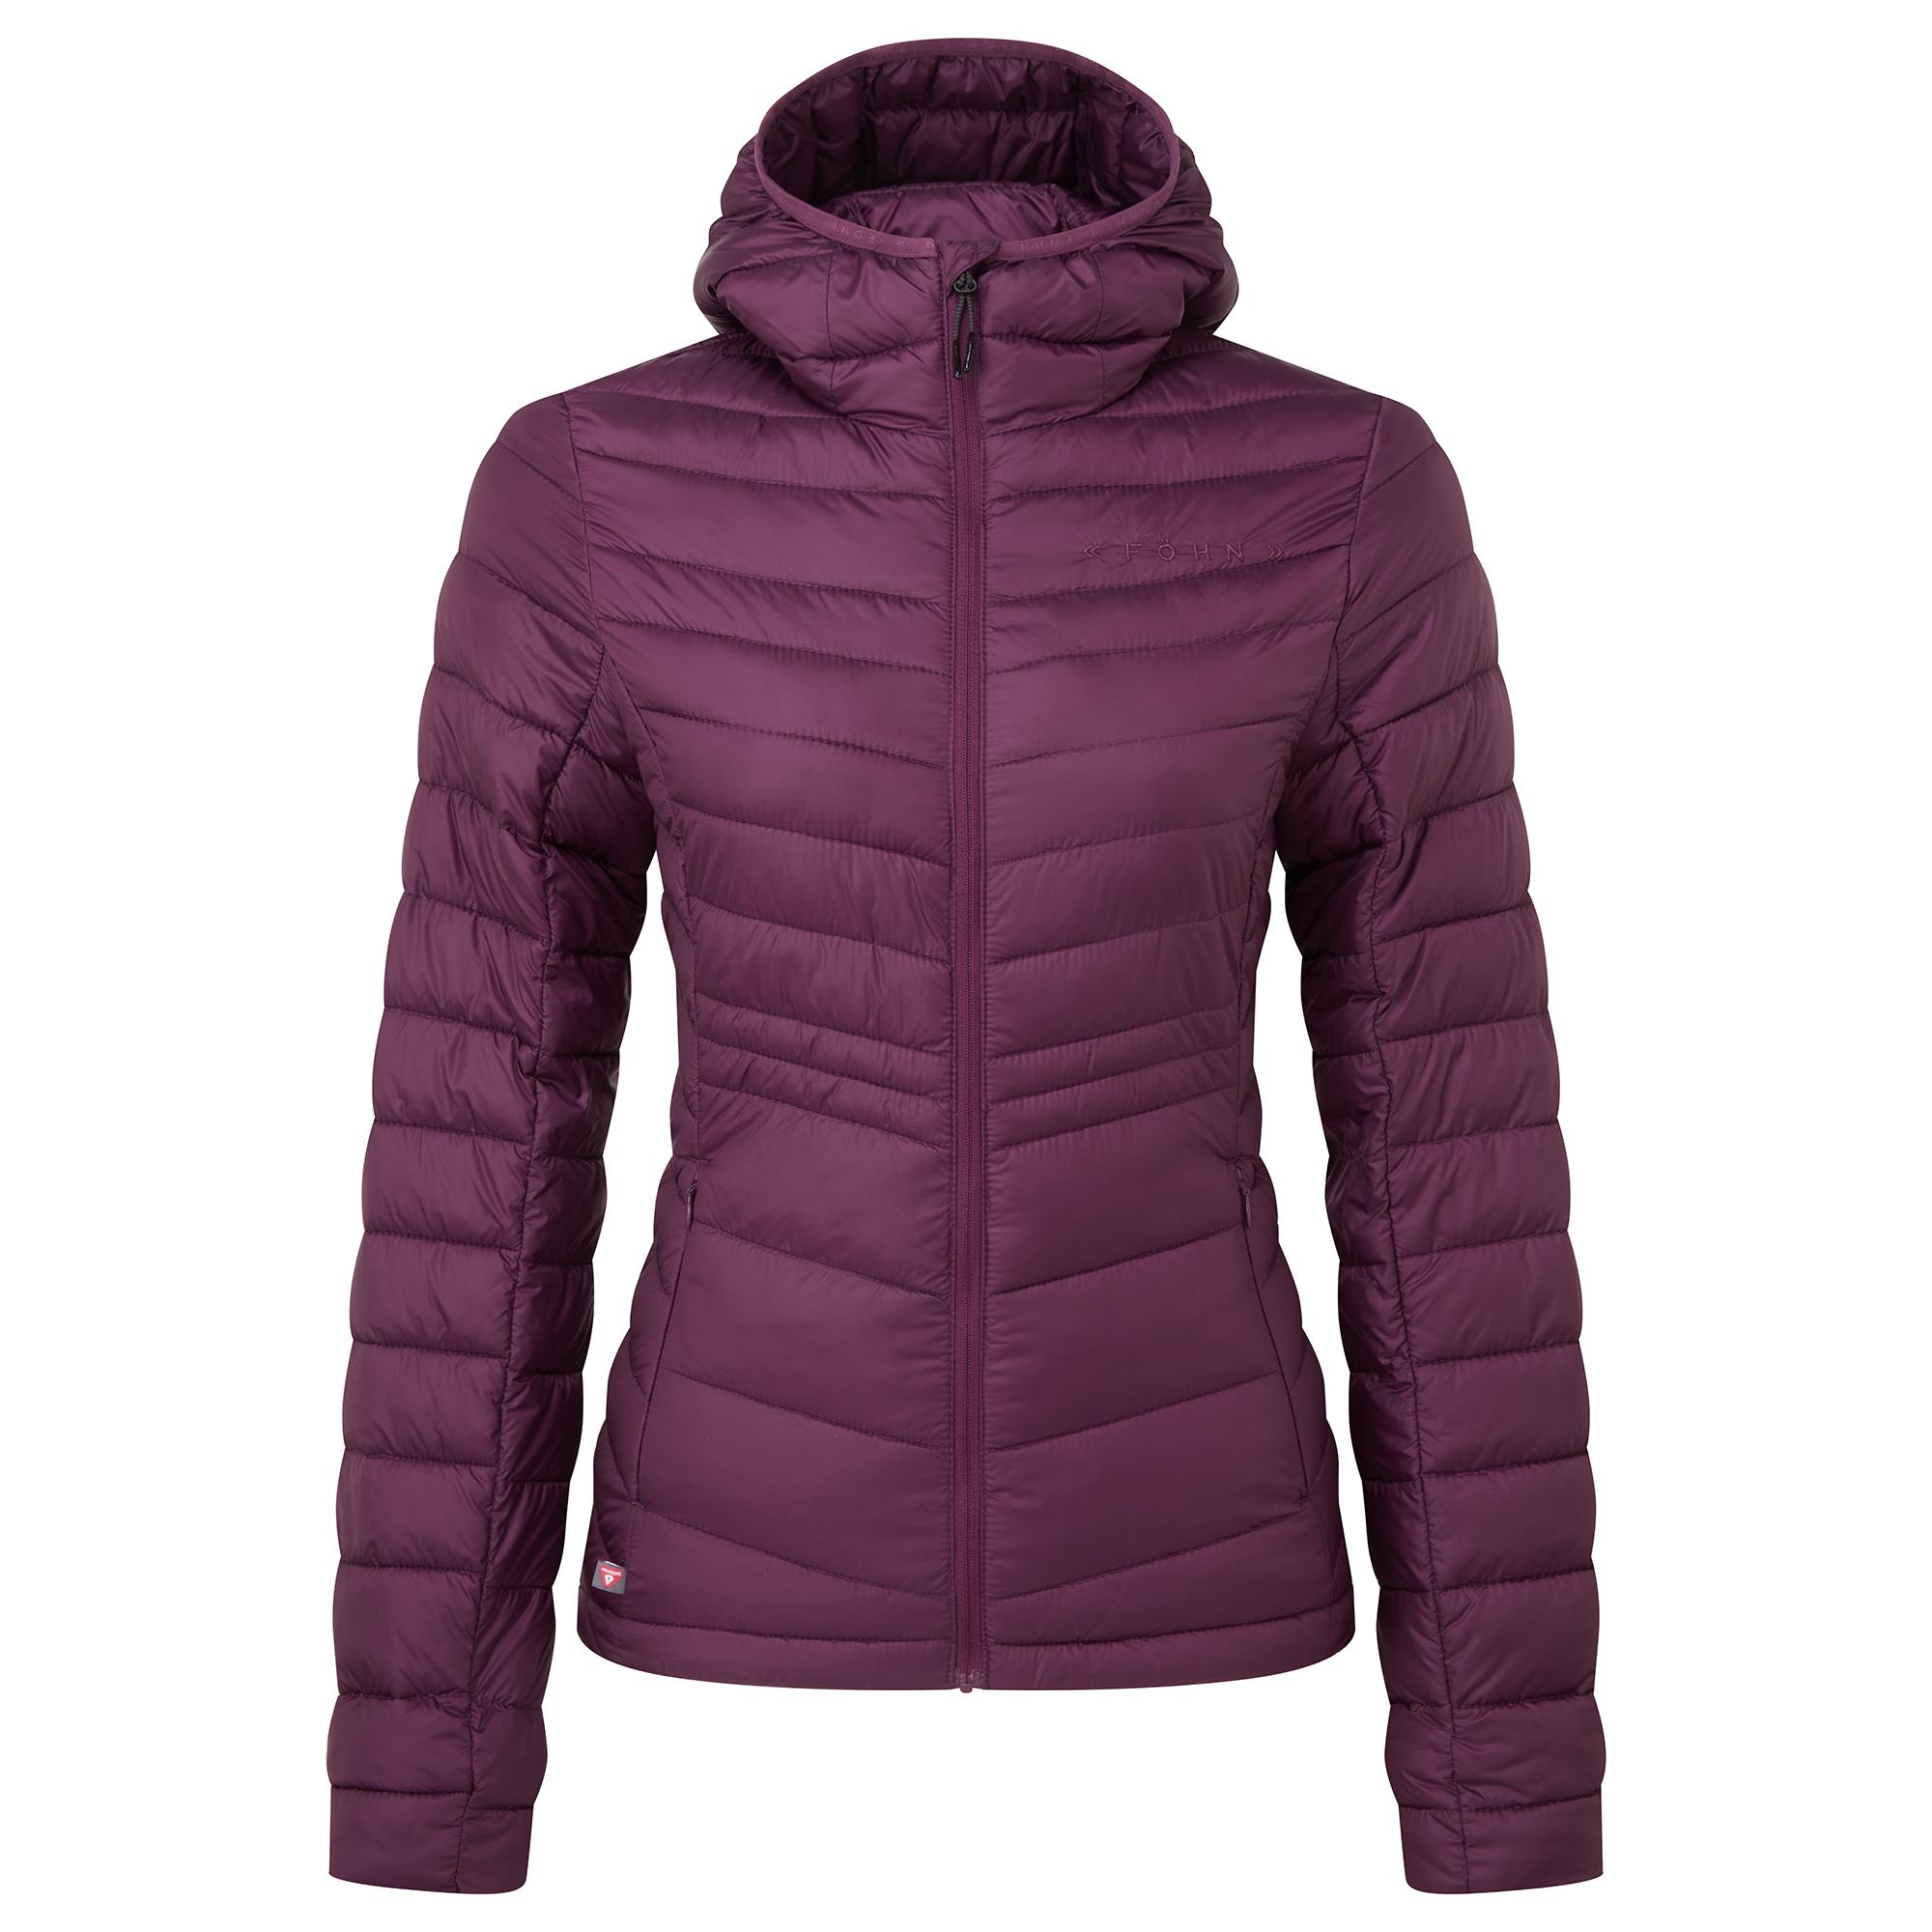 Fhn Womens Micro Synthetic Down Hooded Jacket - Potent Purple